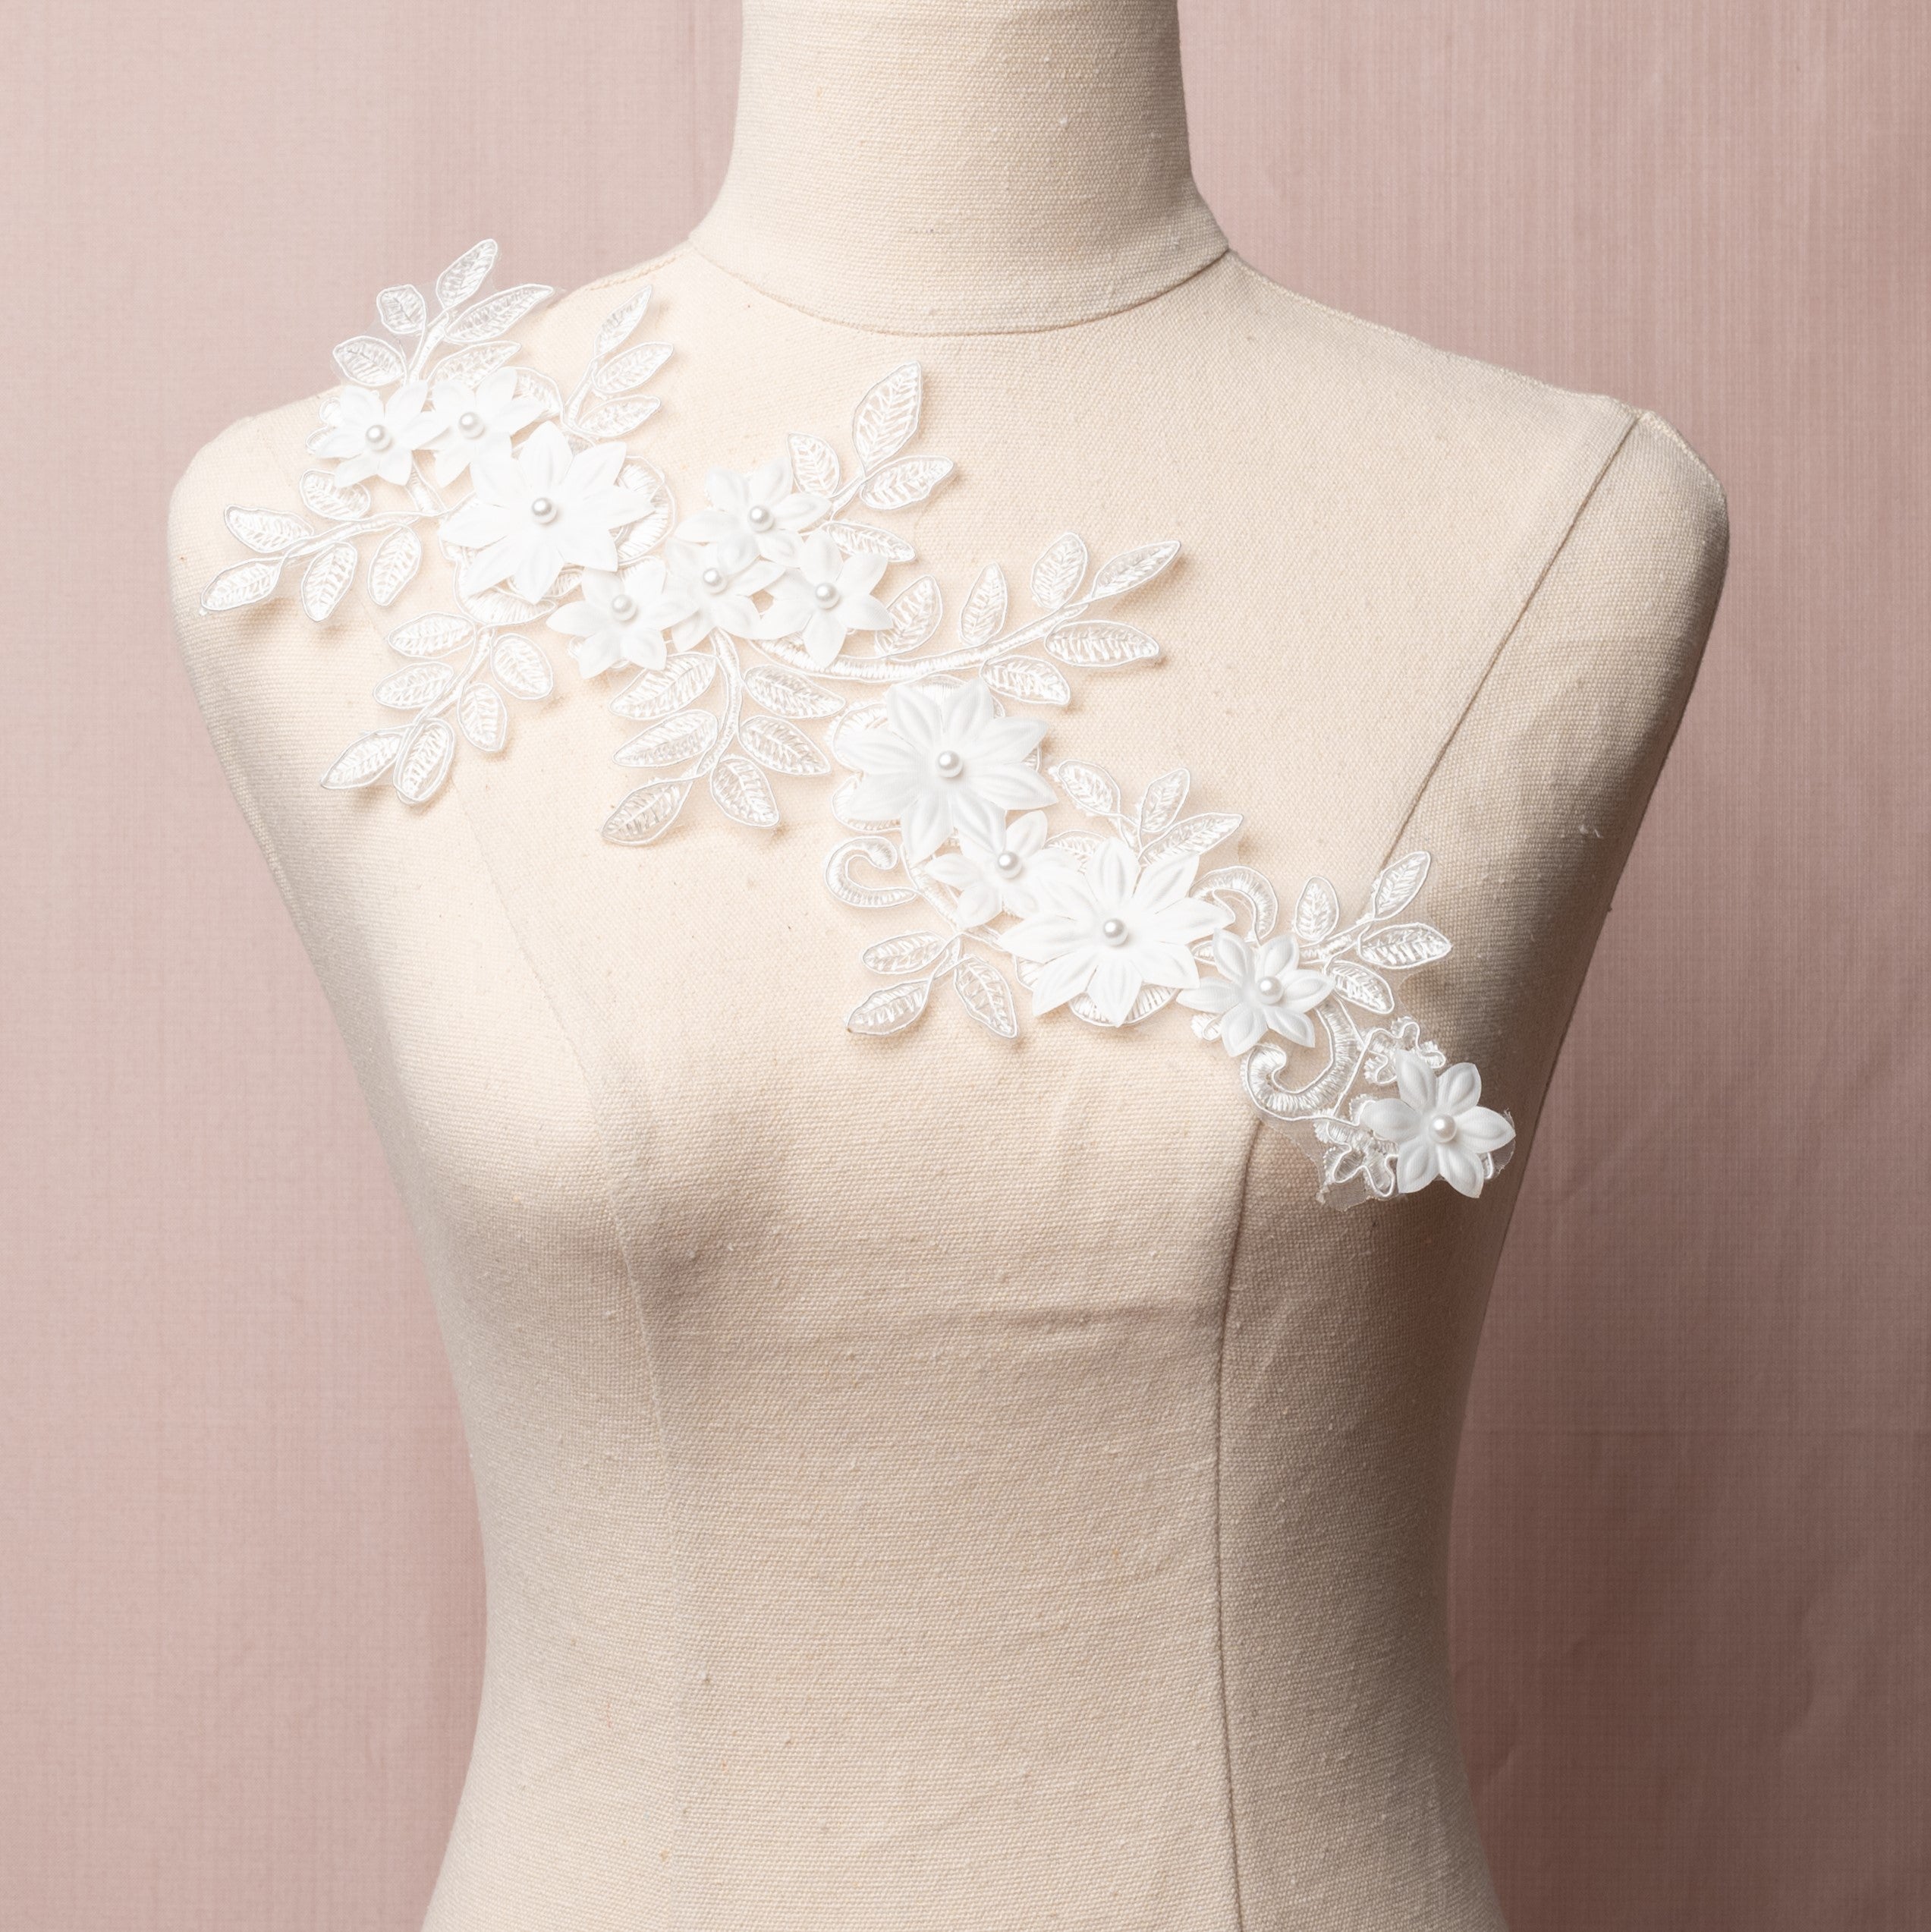 Single white corded floral applique embroidered onto an organza backing.  The applique is embellished with 3D fabric flowers that have a pearl centre.  The applique is displayed on the diagonal on a mannequin.